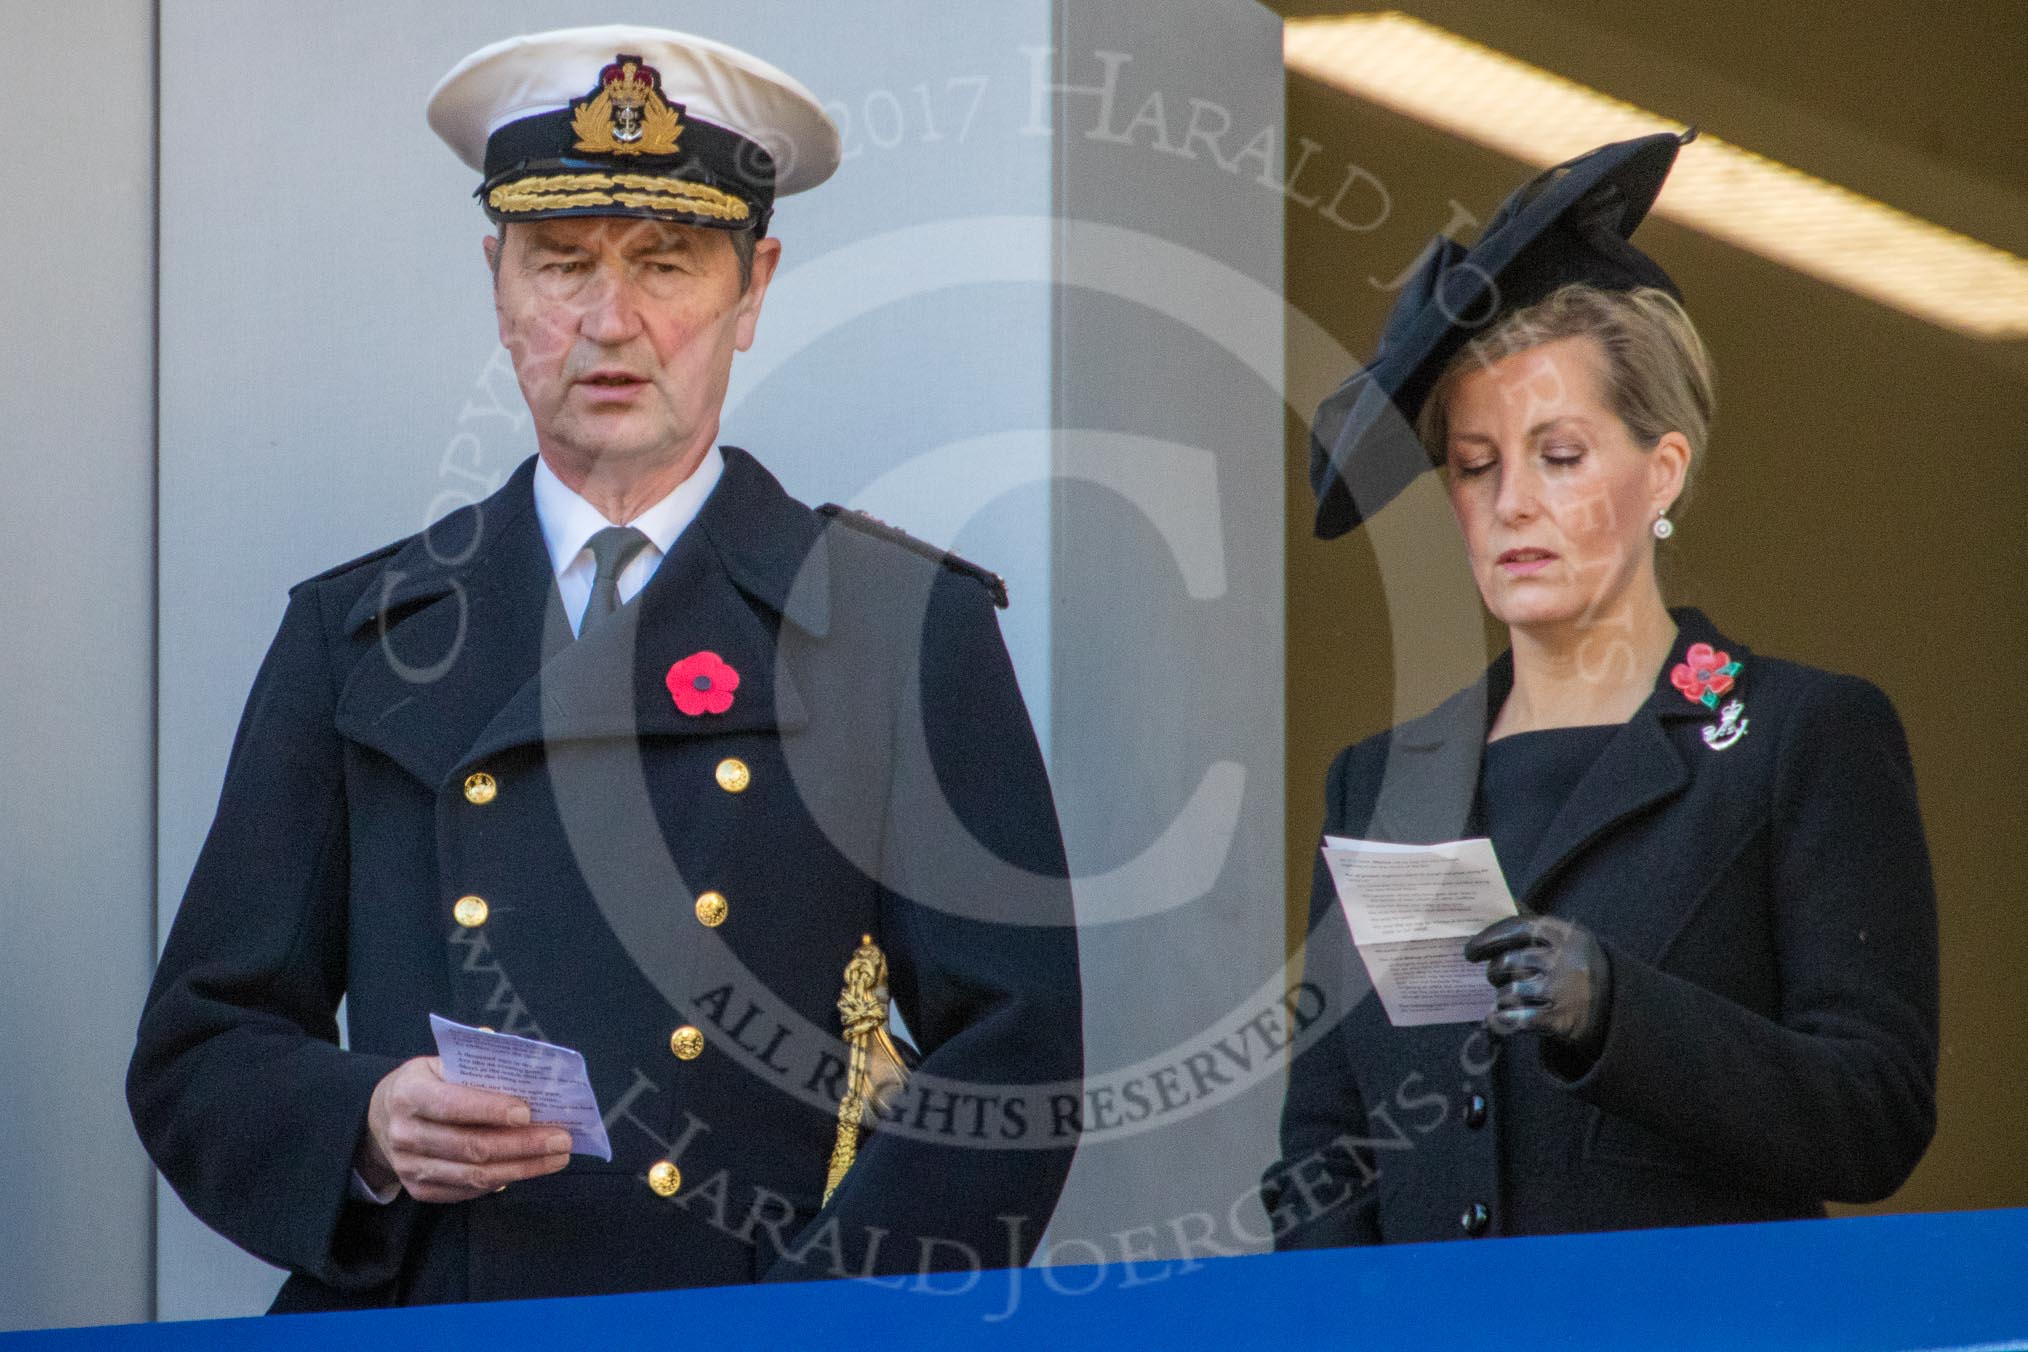 Vice Admiral Sir Tim Laurence, husband of HRH The Princess Royal and HRH The Countess of Wessex (Sophie) , singing, on the balcony of the Foreign and Commonwealth Office during the Remembrance Sunday Cenotaph Ceremony 2018 at Horse Guards Parade, Westminster, London, 11 November 2018, 11:18.